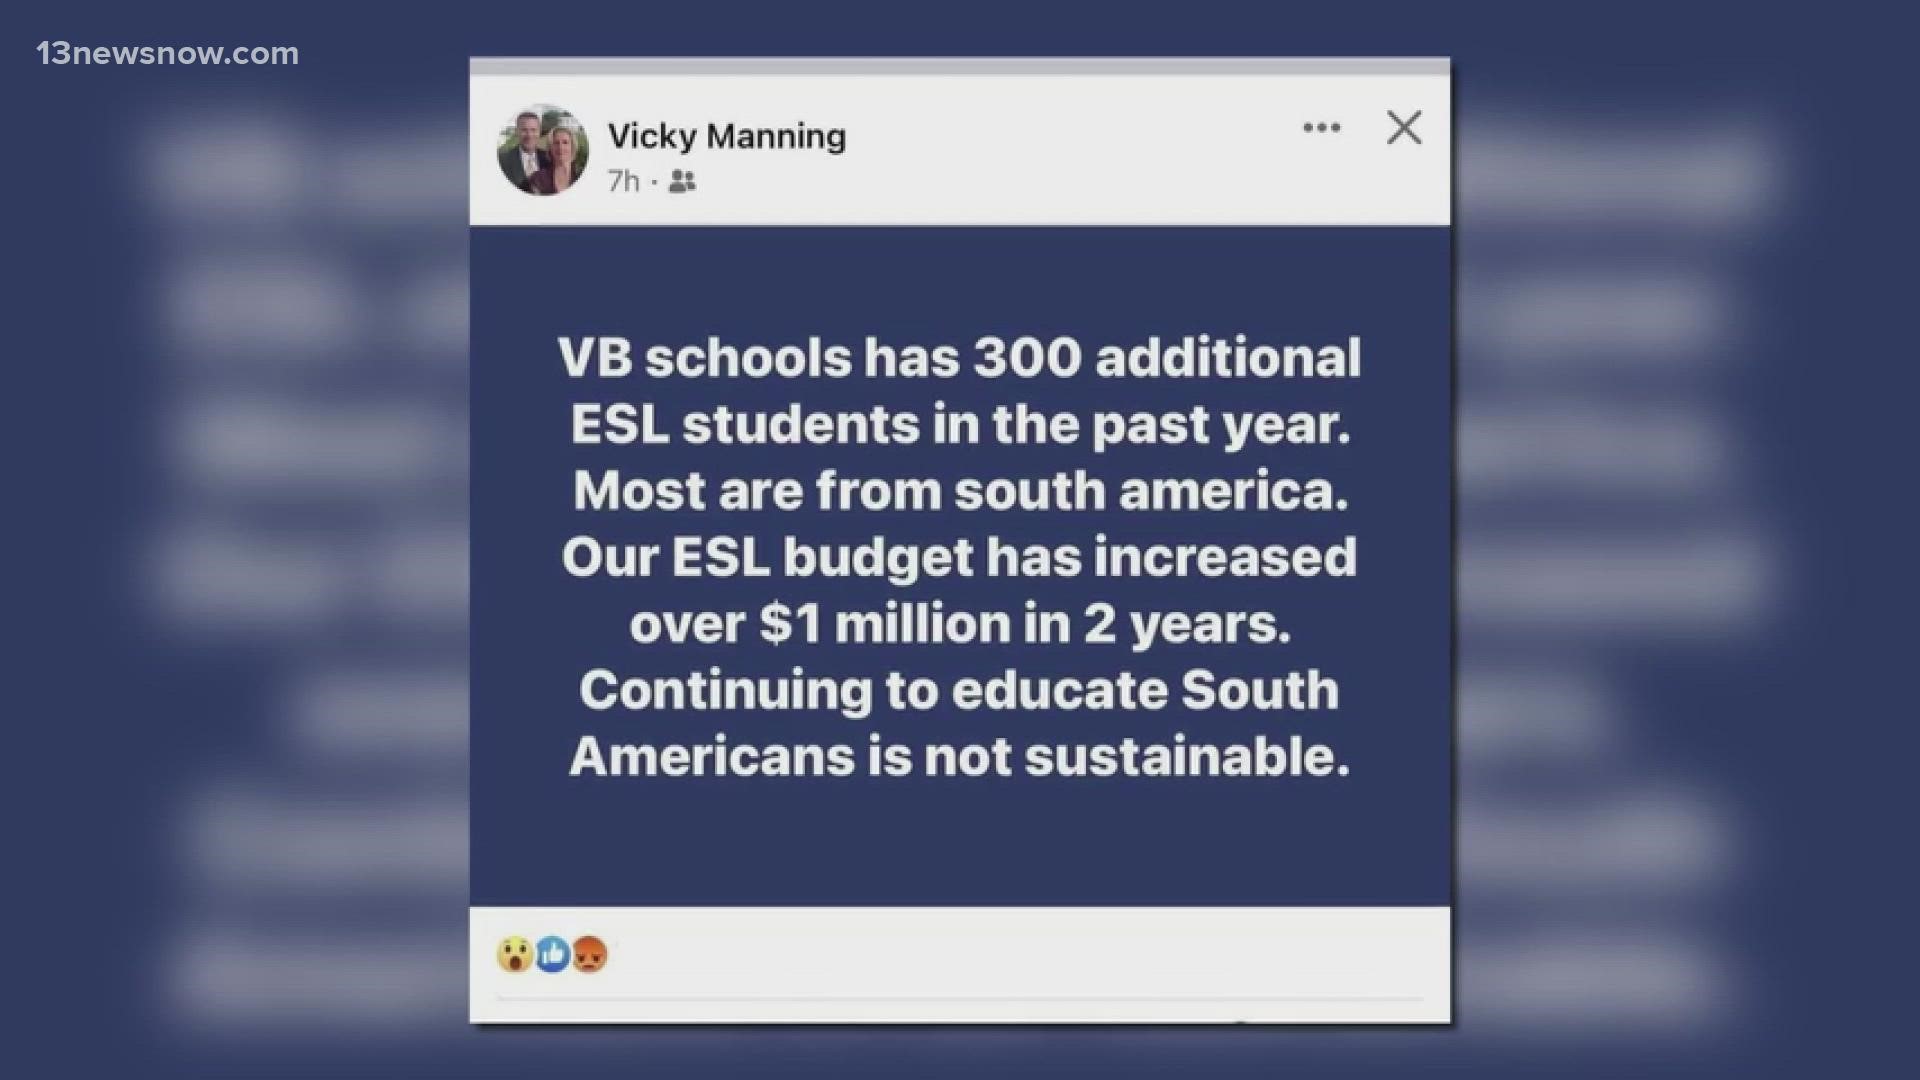 On Facebook, Victoria Manning explained that the ESL student population is growing and said, in part, educating them is “not sustainable."